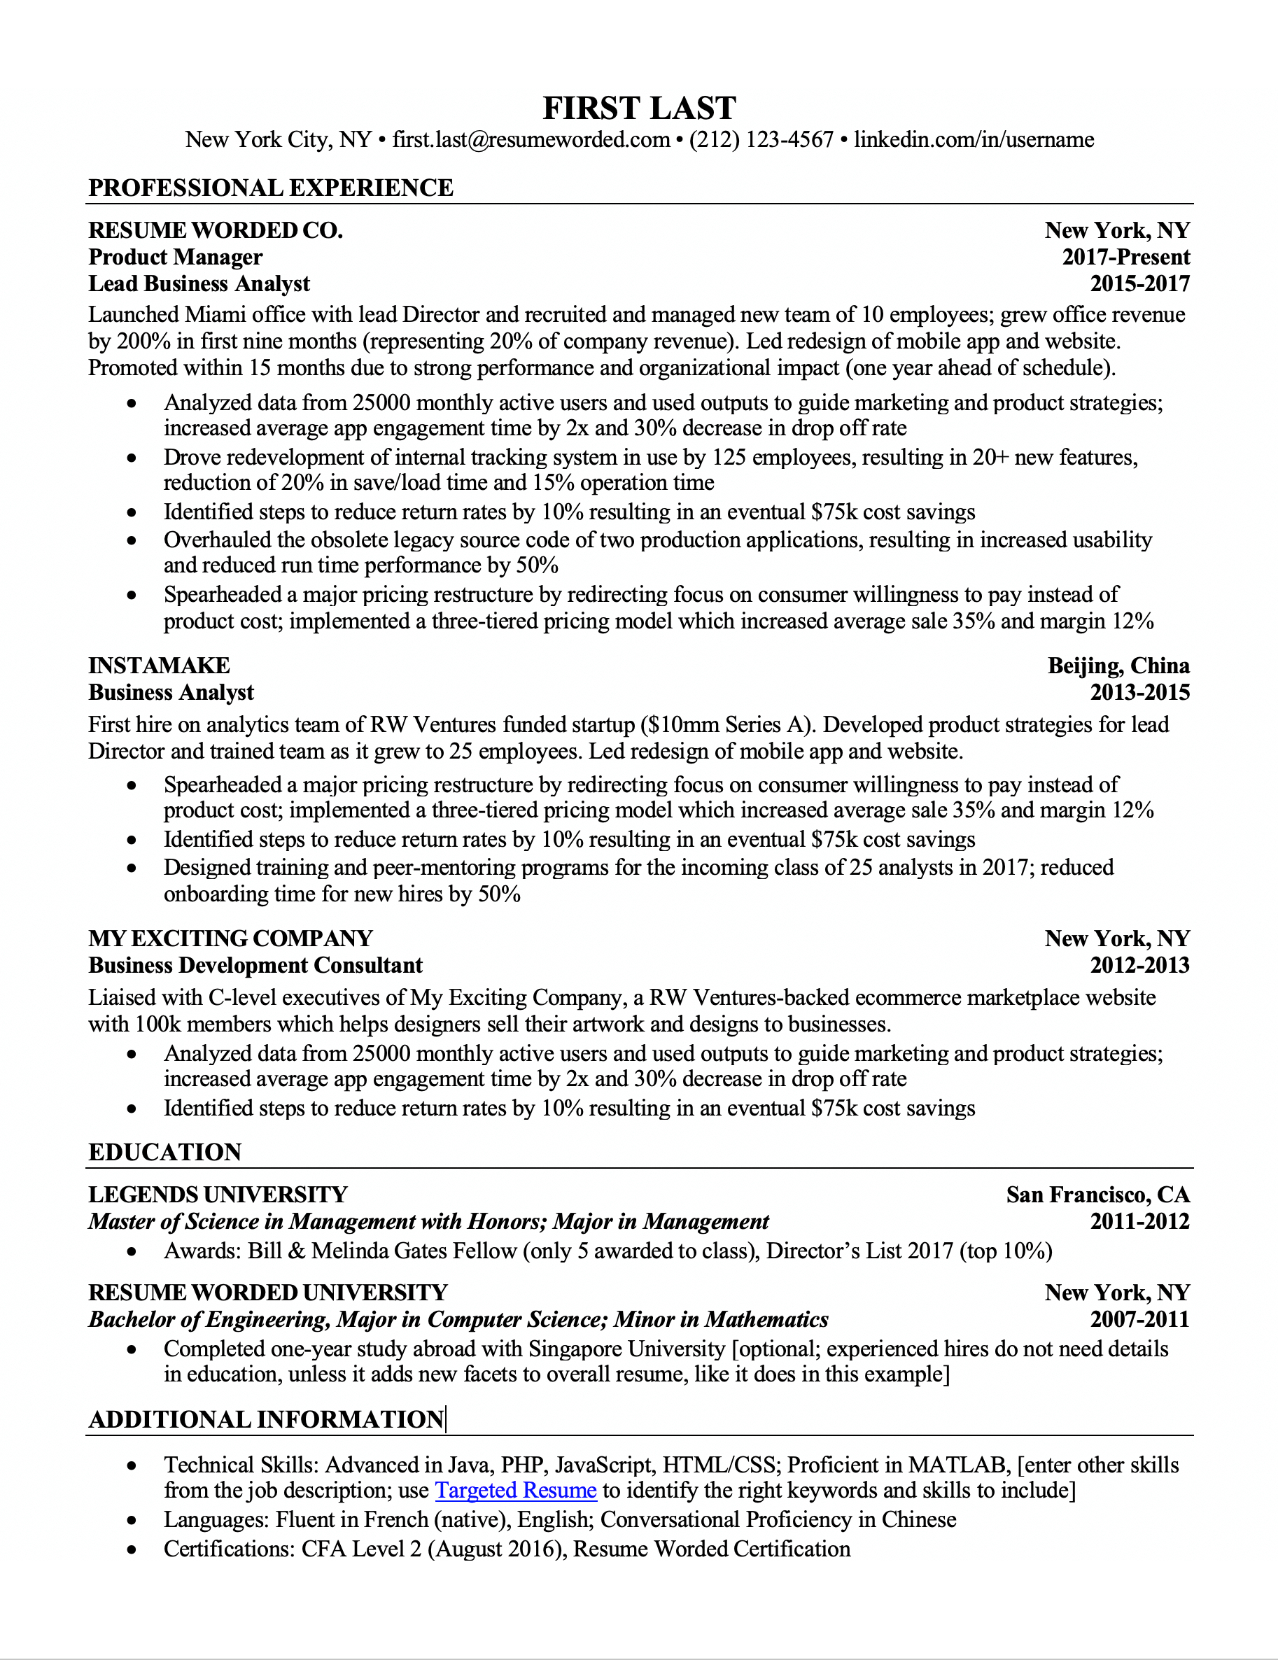 Professional Ats Resume Templates For Experienced Hires And regarding dimensions 1275 X 1650